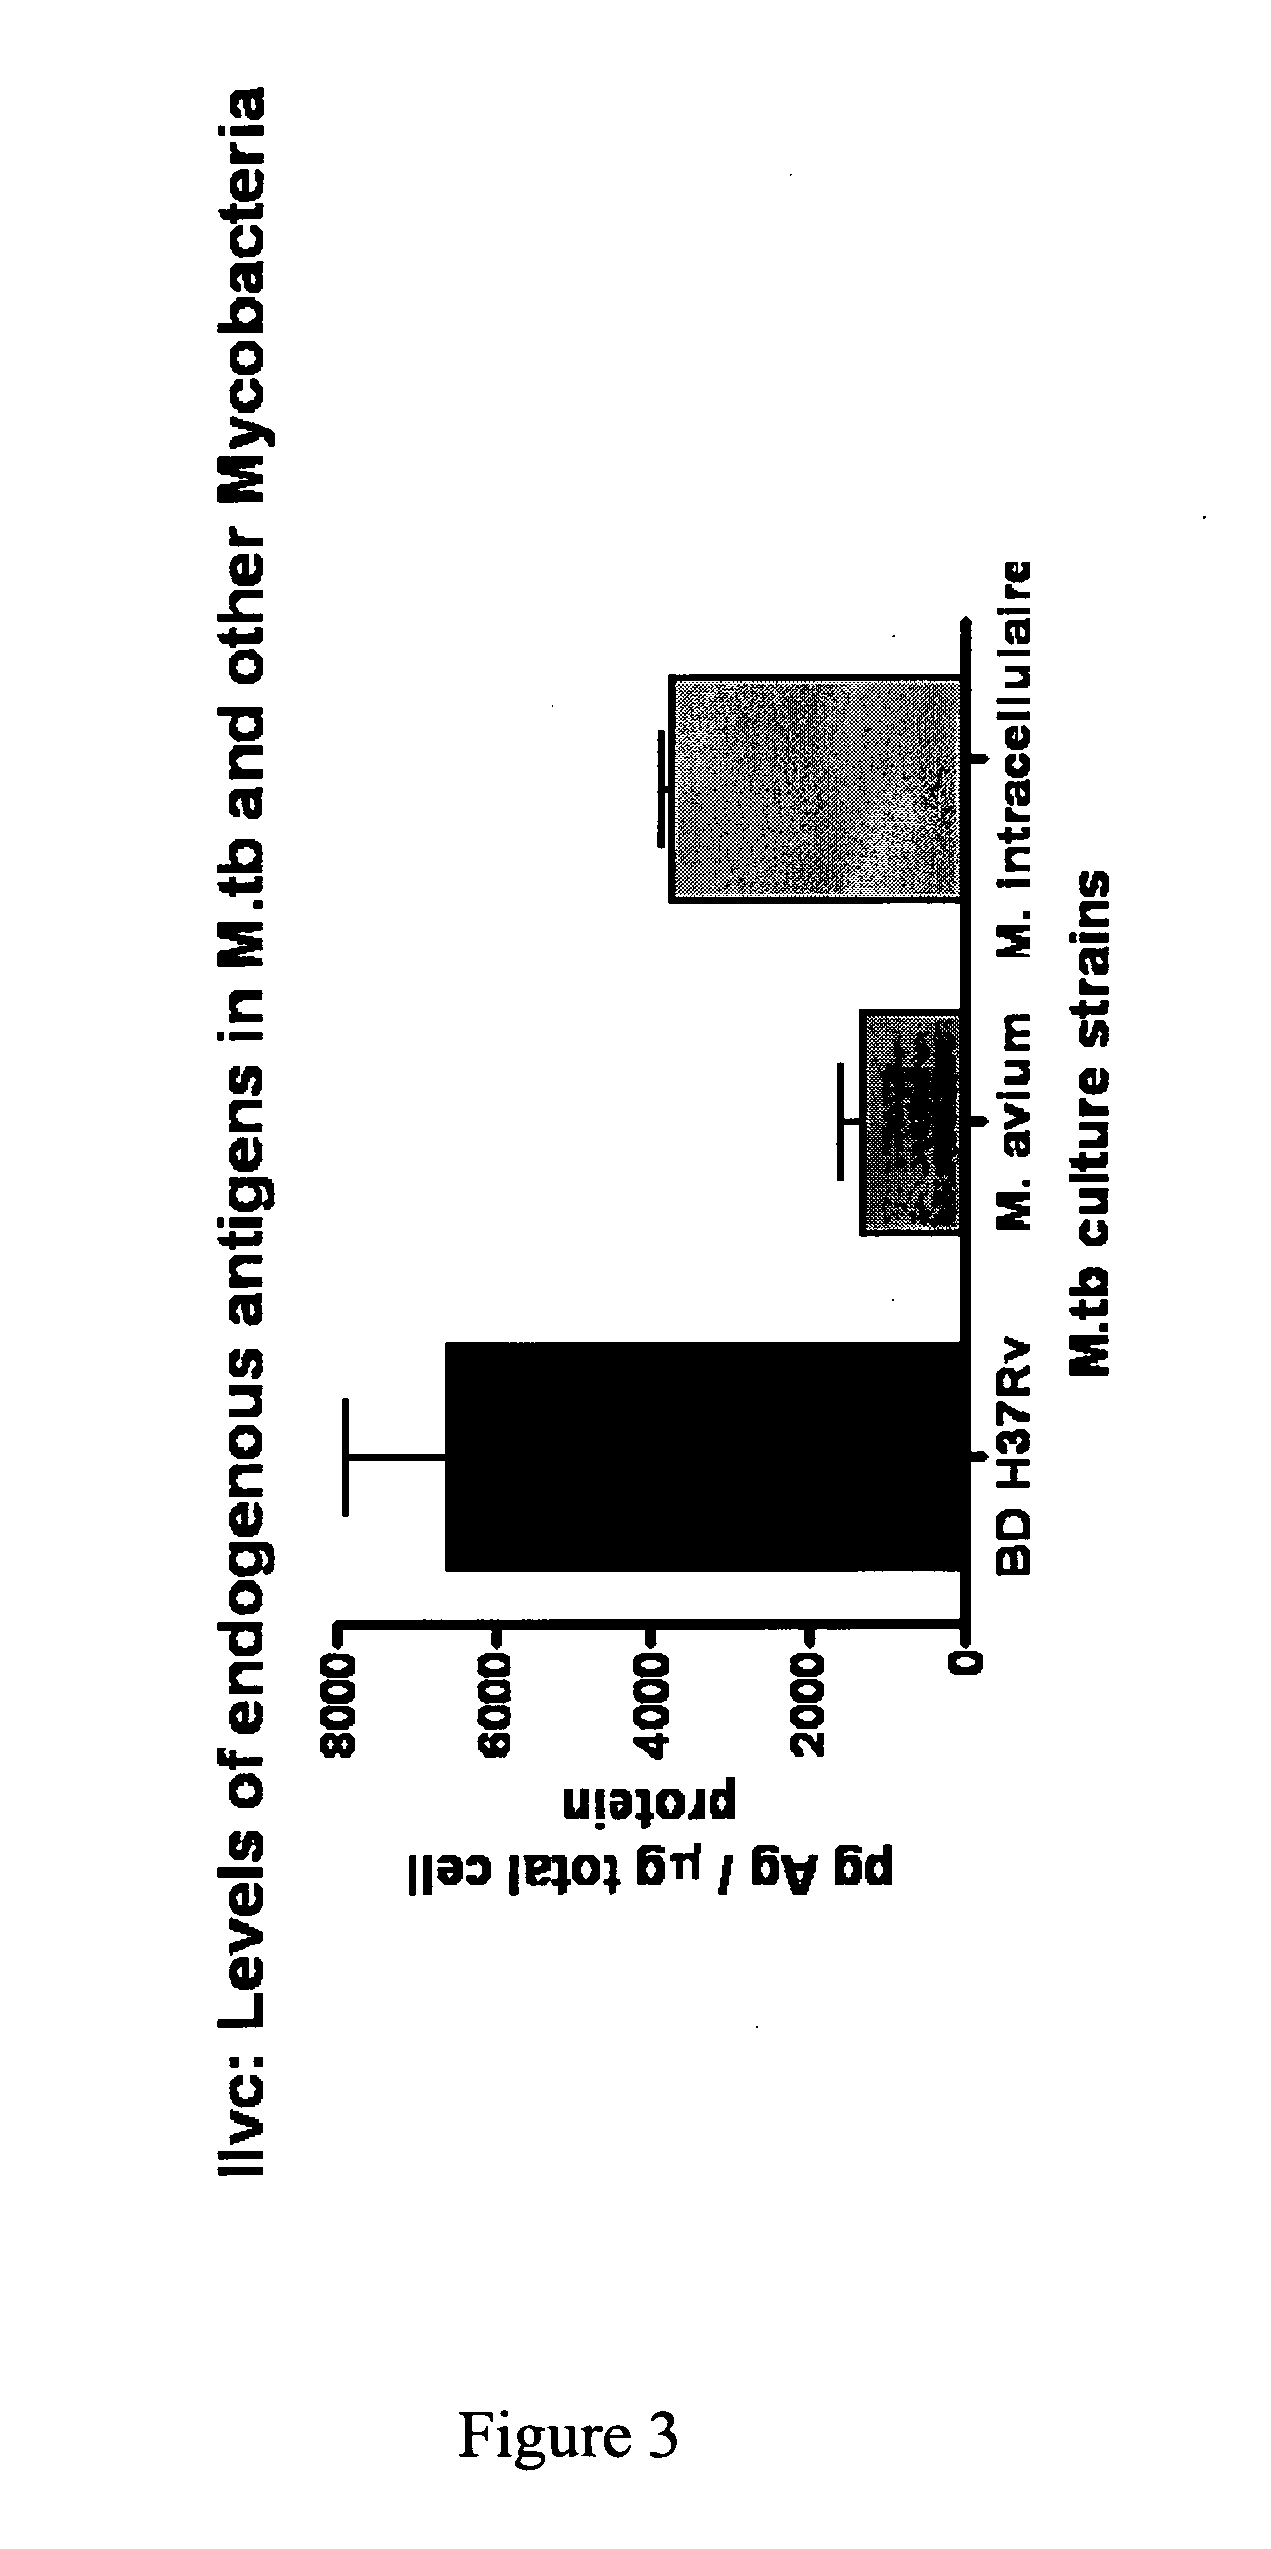 Method of Diagnosis of Infection by Mycobacteria and Reagents Therefor